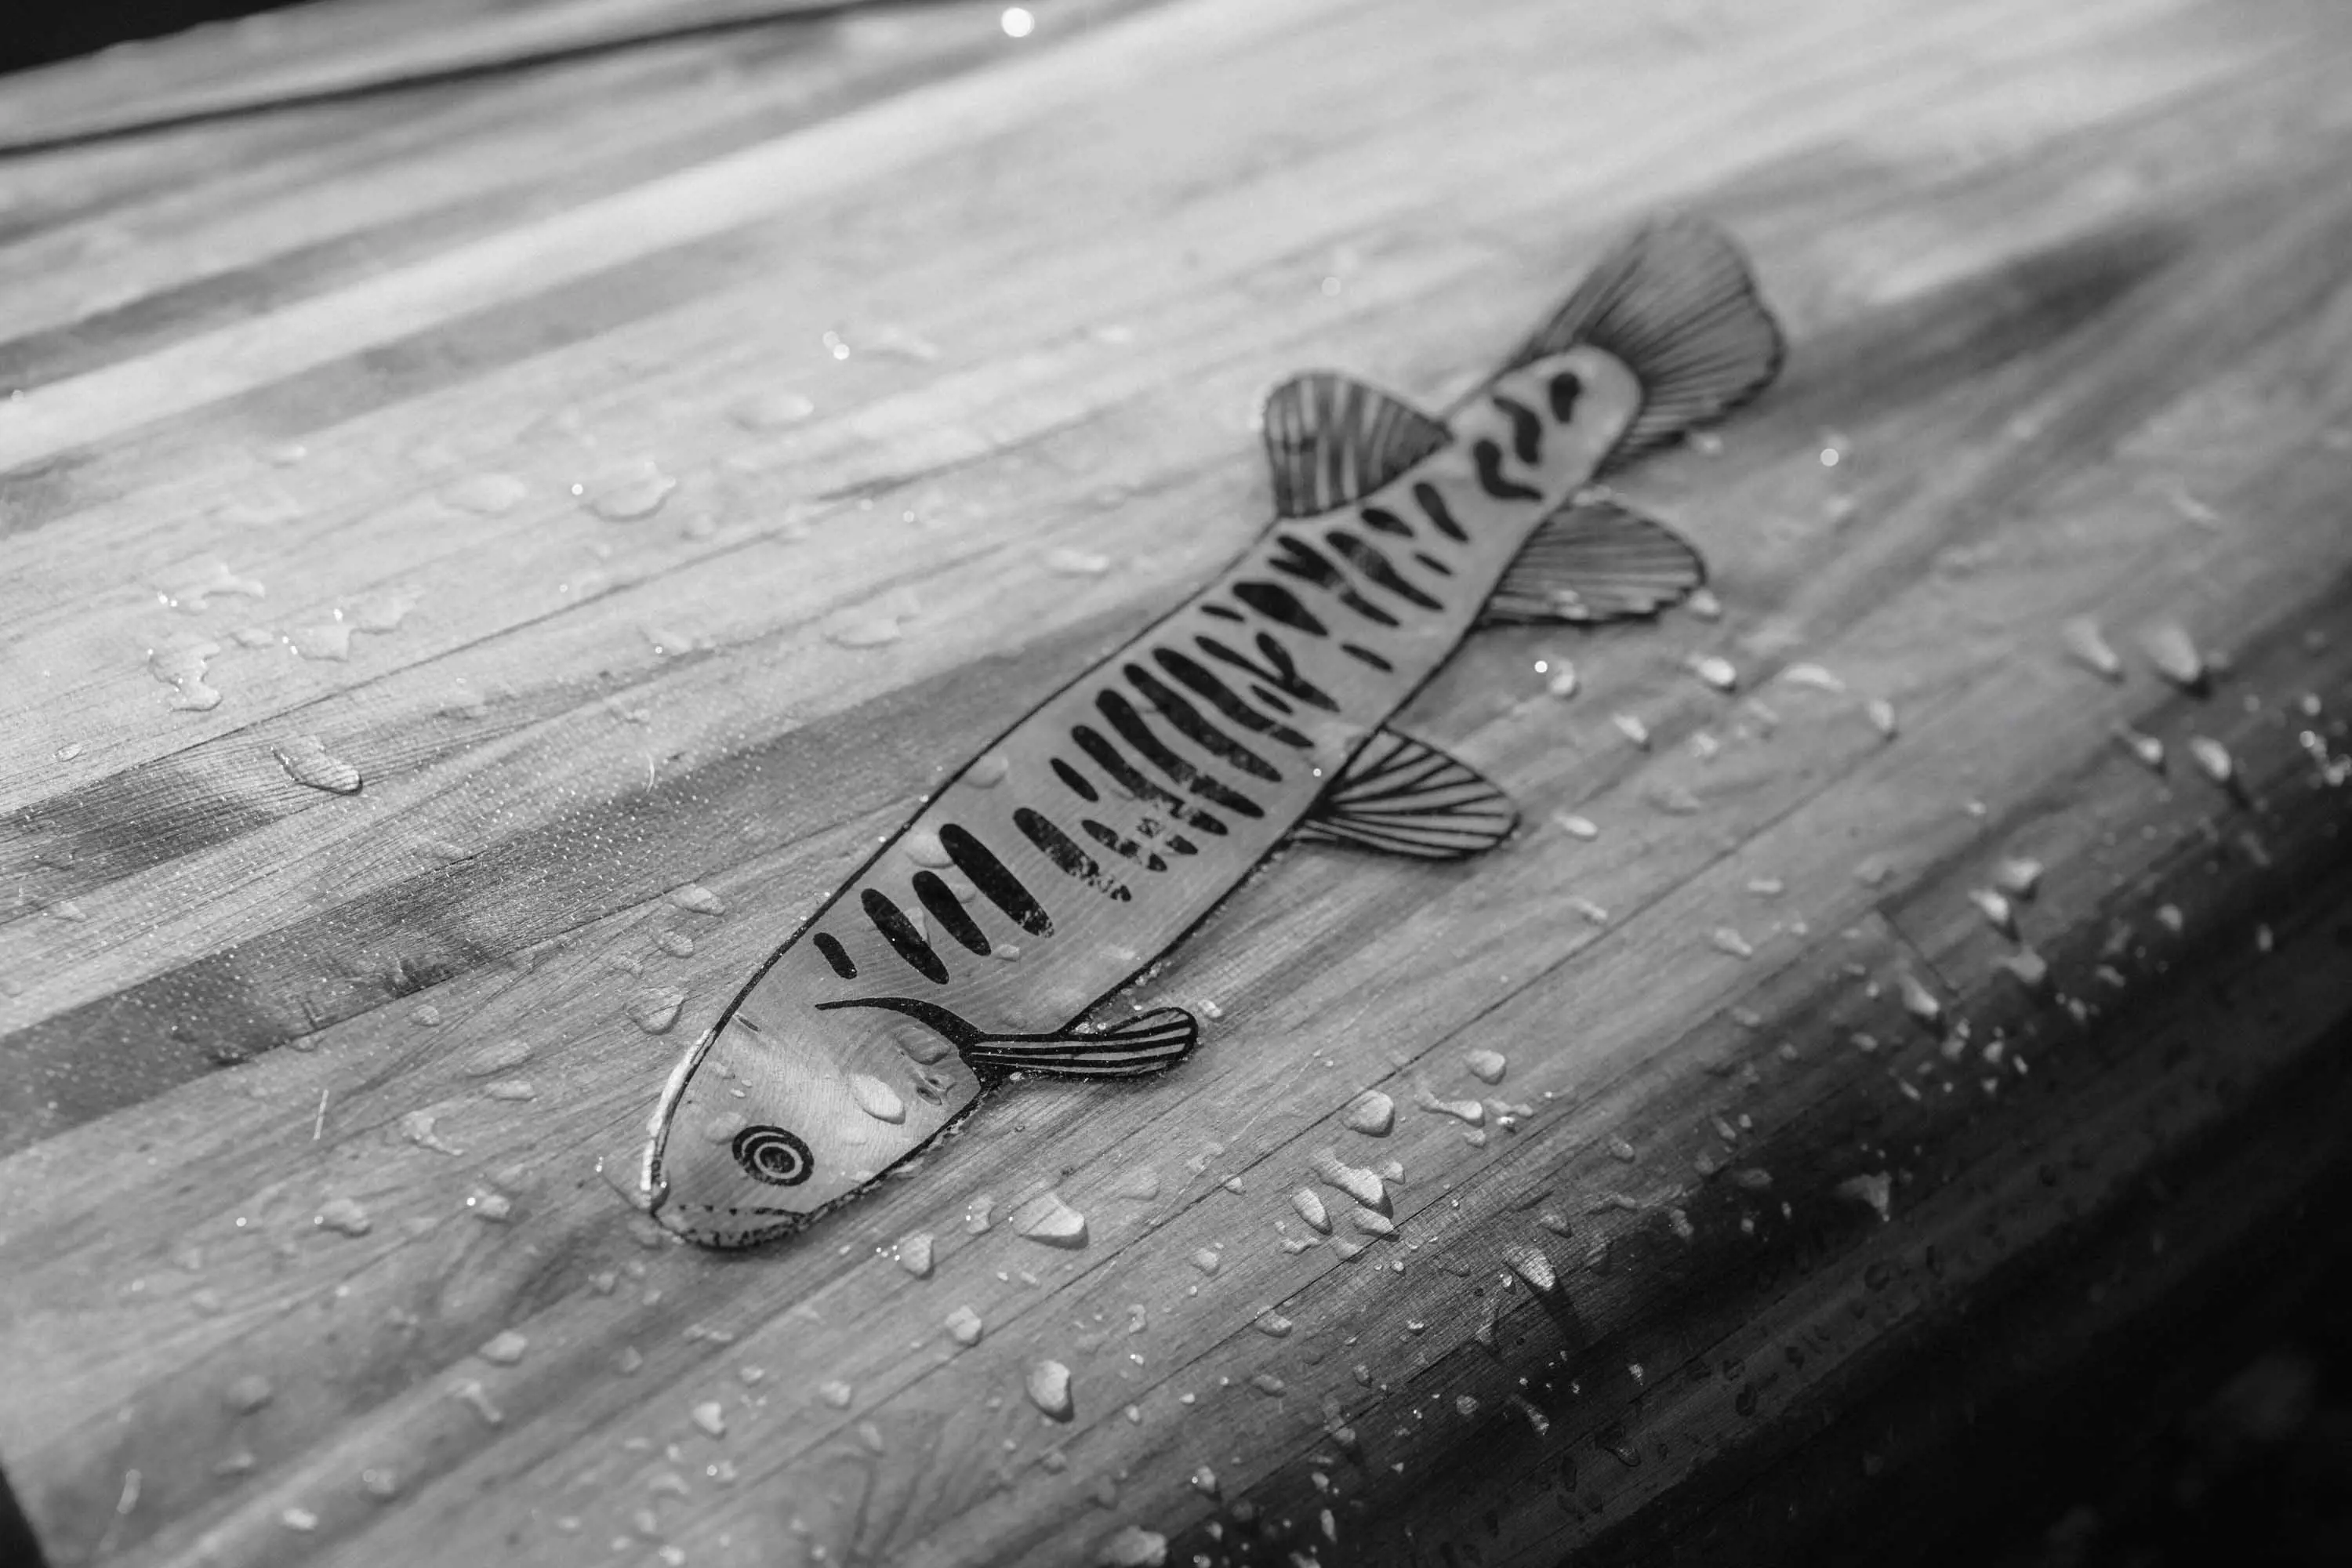 The hull of a wooden canoe is decorated with an image of a fresh-water trout inset into the wood.